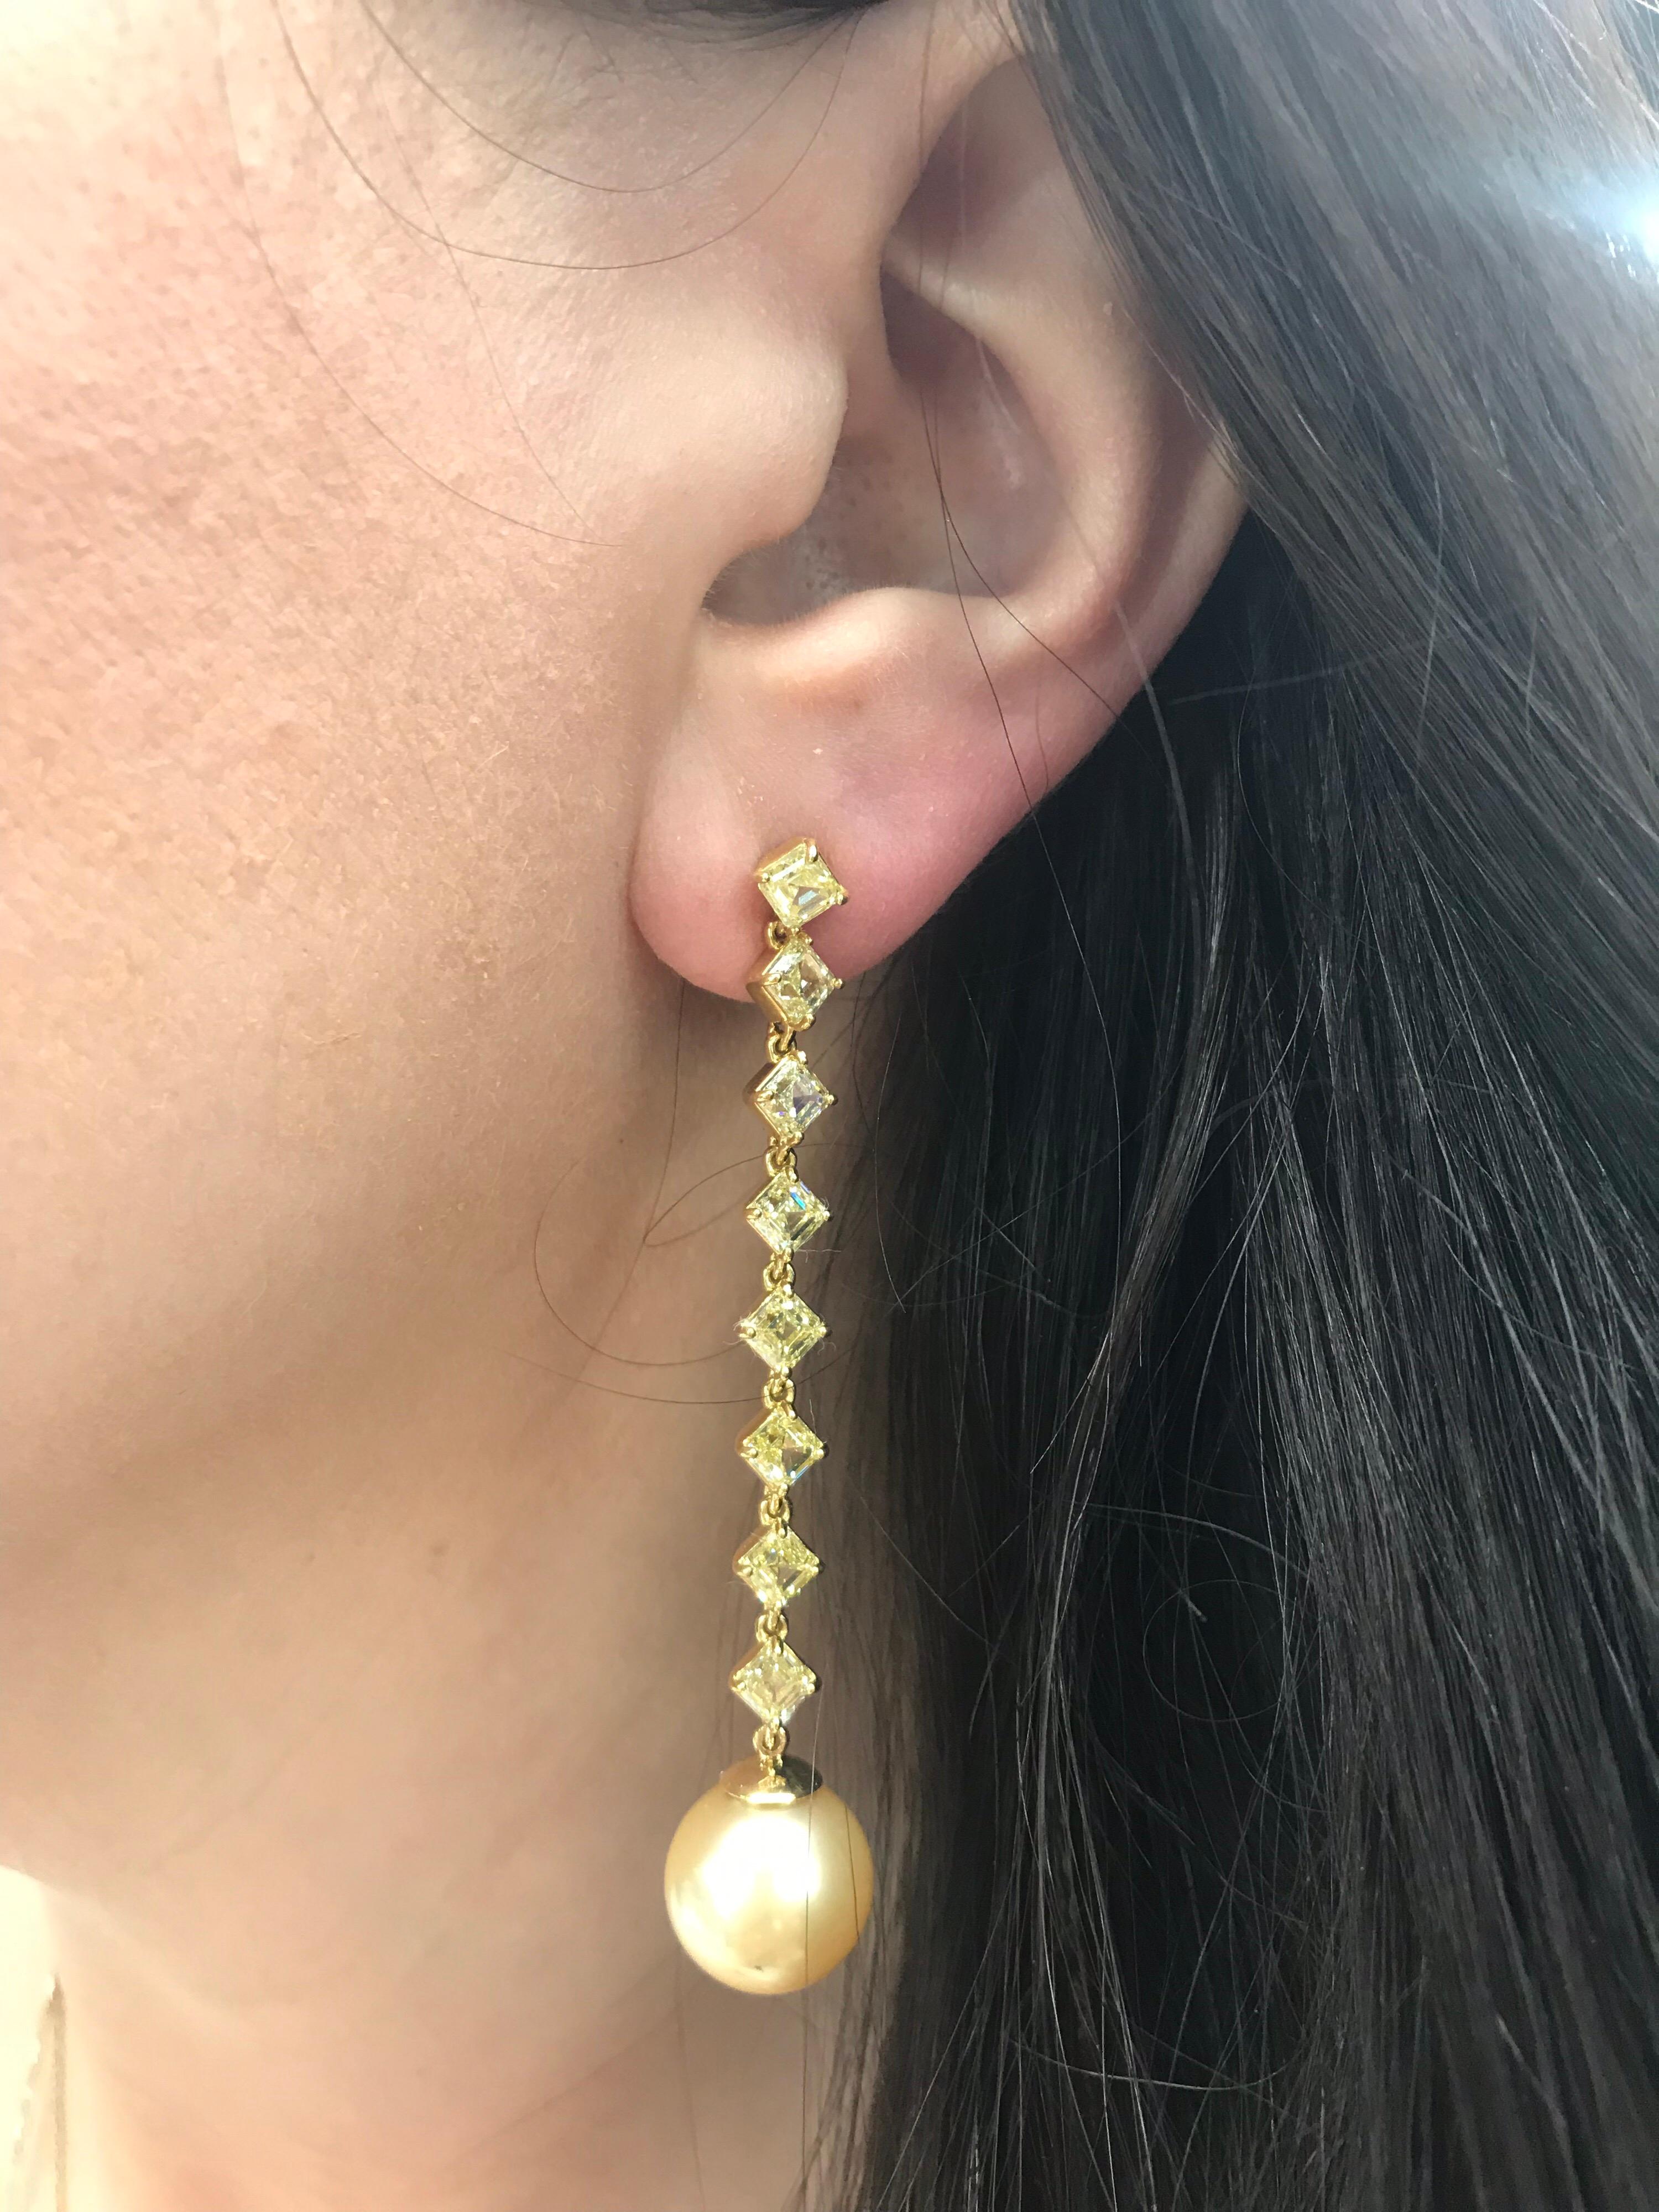 Diamond drop earrrings featuring 16 Fancy Light Yellow Asscher cuts weighing 6.14 carats of VVS2-VS1 clarity and two golden South Sea pearls meausring 12-13 mm. 

Very impressive in person! Shows more of a golden tone. 